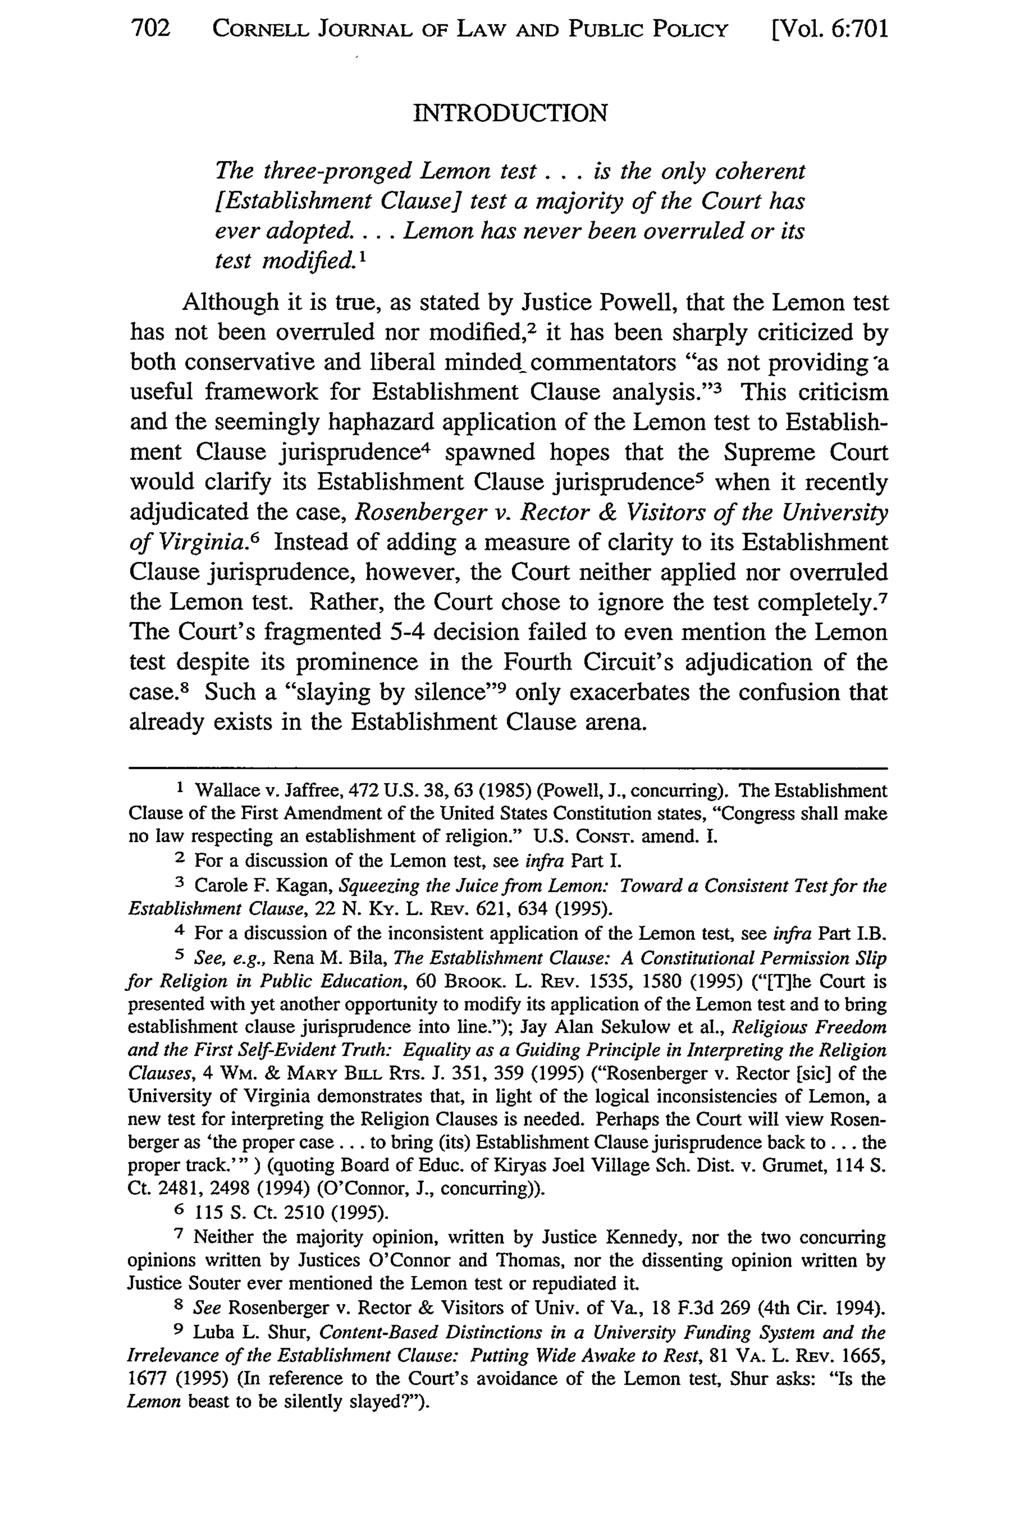 702 CORNELL JOURNAL OF LAW AND PUBLIC POLICY [Vol. 6:701 INTRODUCTION The three-pronged Lemon test... is the only coherent [Establishment Clause] test a majority of the Court has ever adopted.